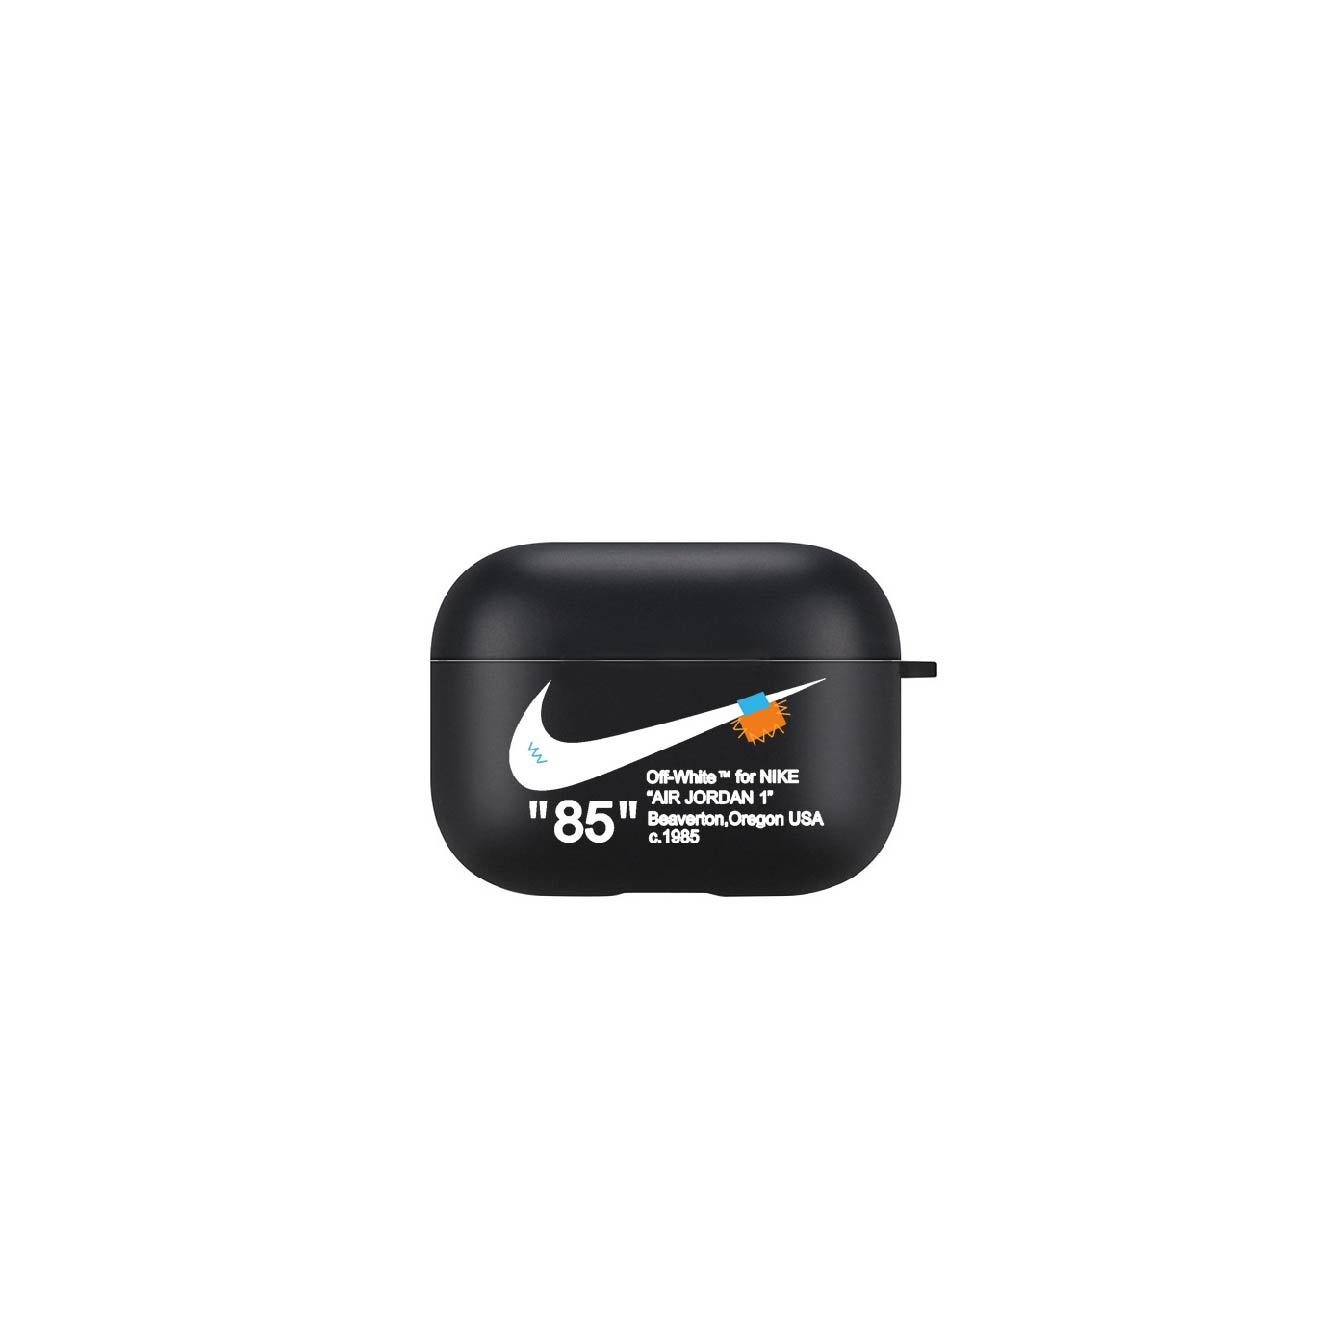 Off White x Nike Airpod Pro Case and 50 items